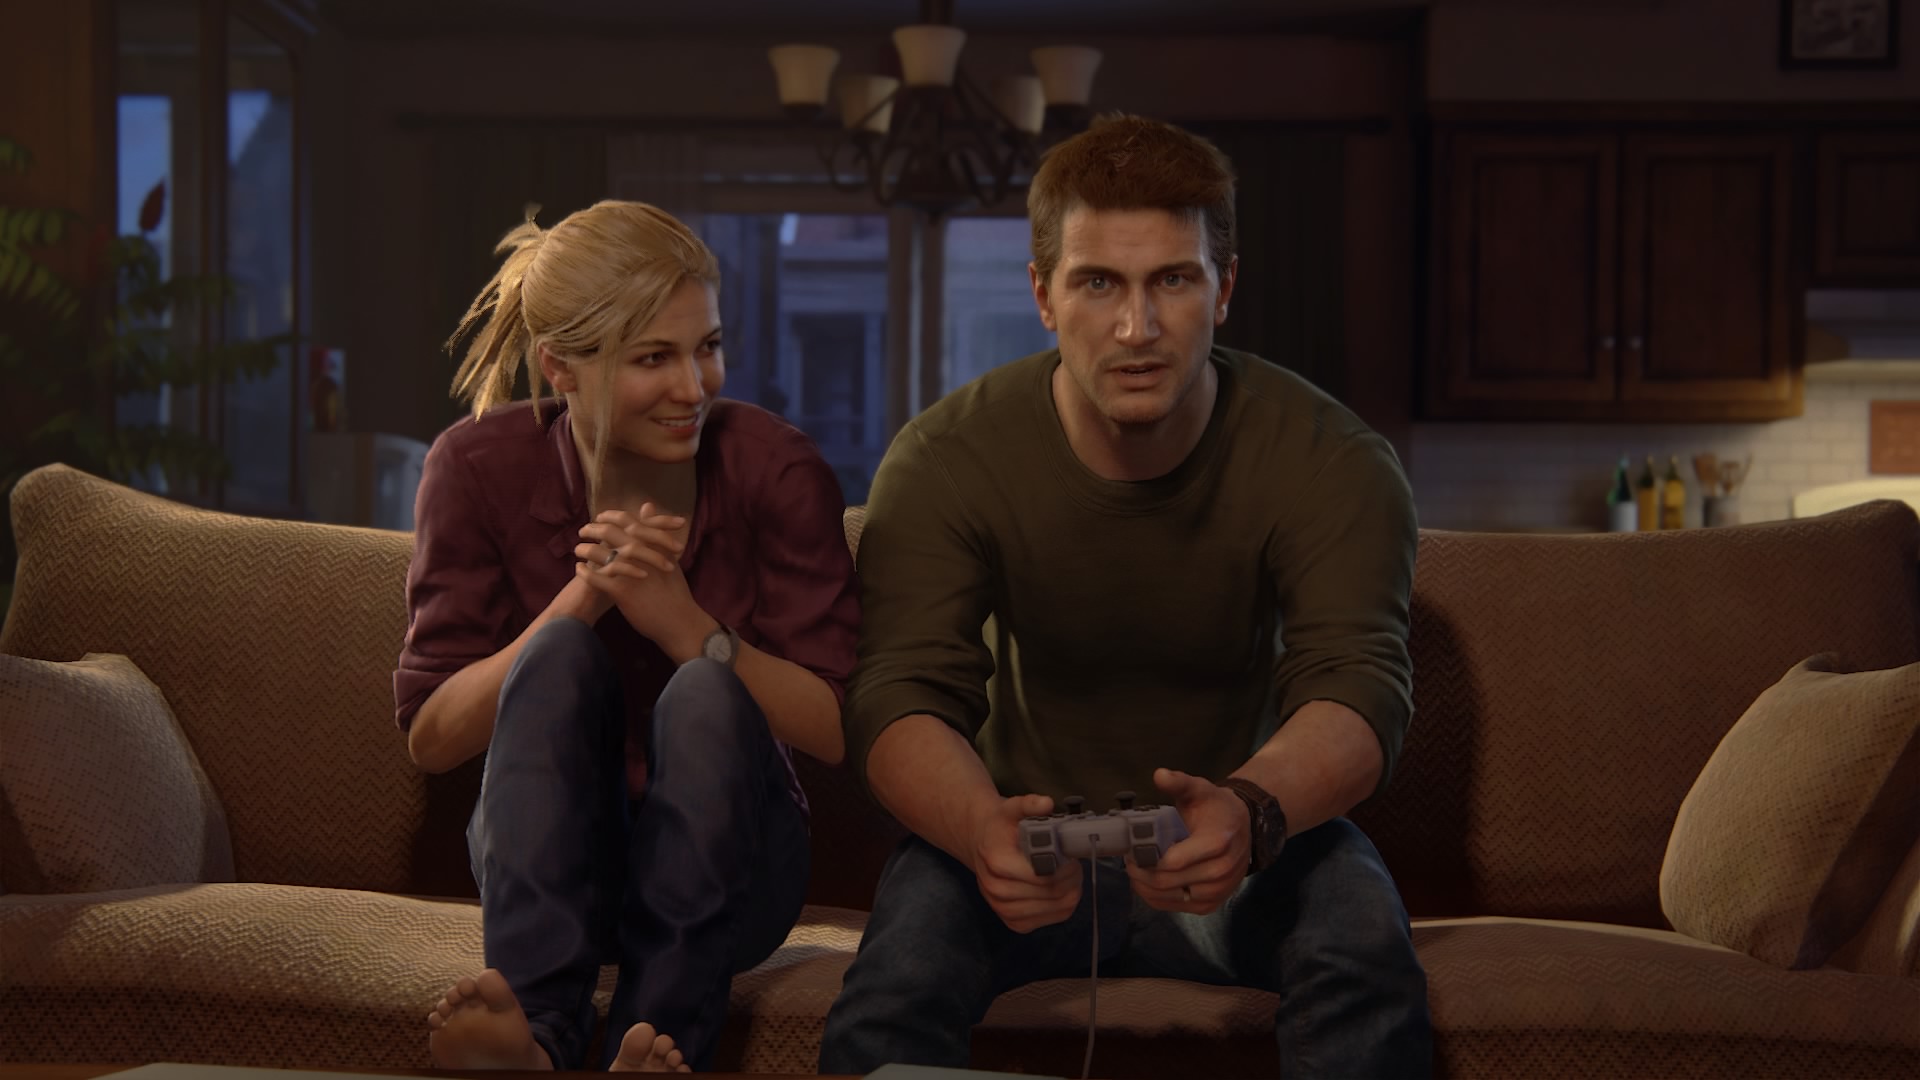 A Thief's End: Reviewing the Twitter reviews for Uncharted 4